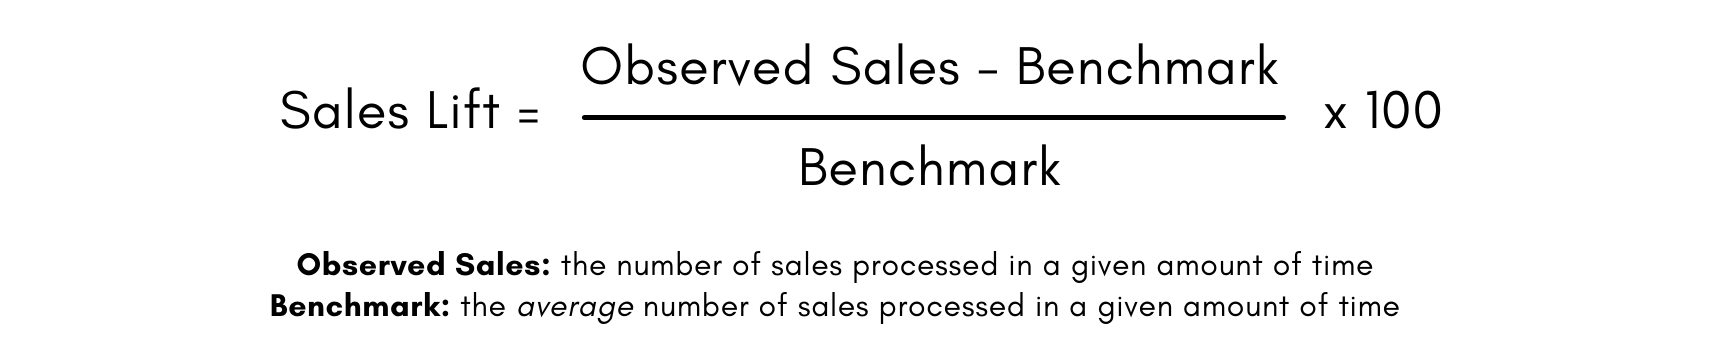 Formula for Sales Lift: Number of New sales minus the benchmark, divided by the benchmark, times 100.